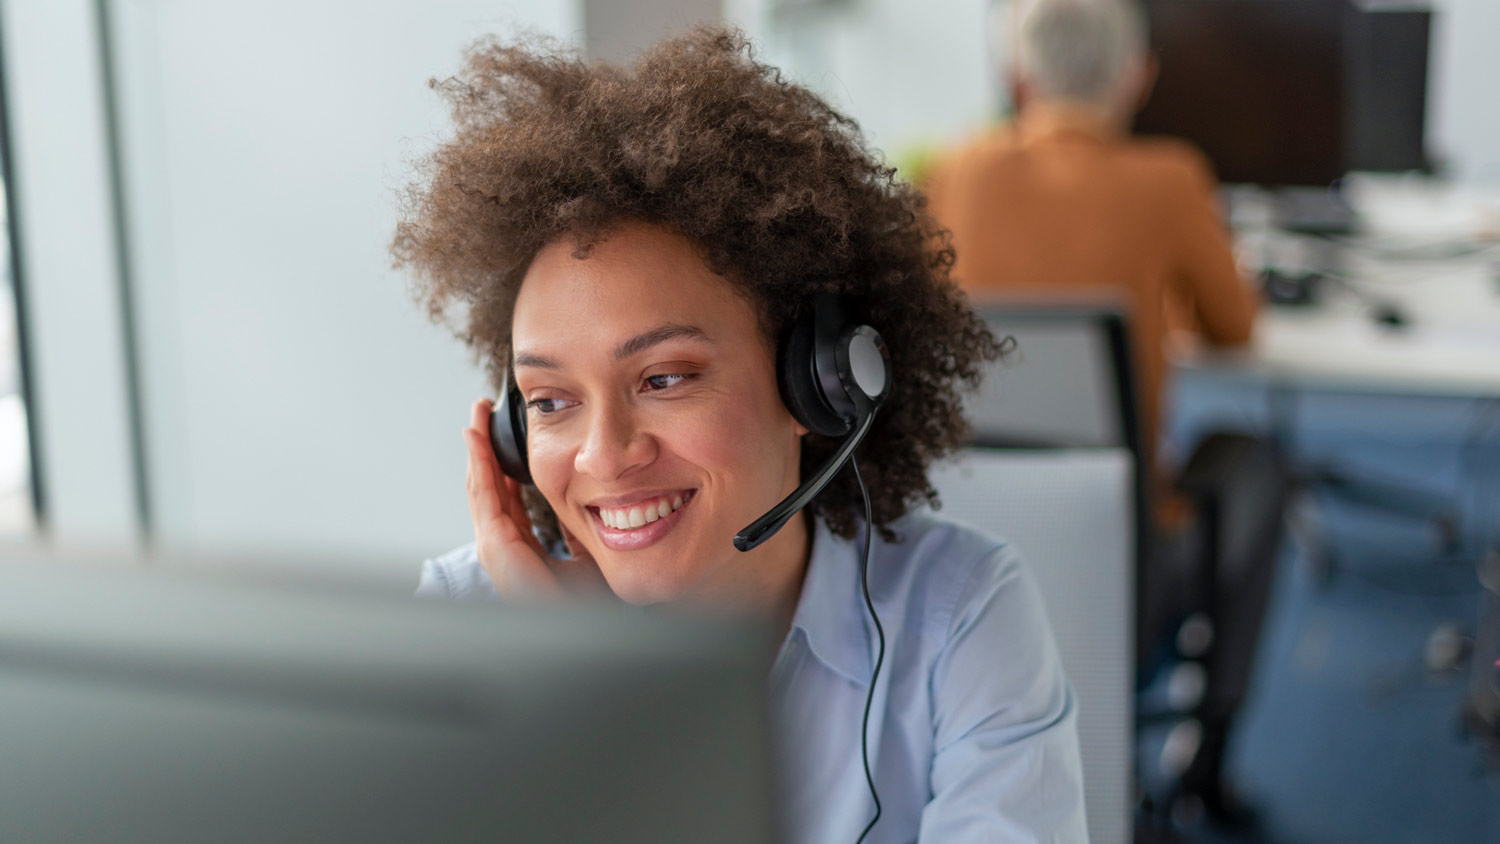 4 Ways To Rethink Your Customer Service Model for Fast, Quality Support